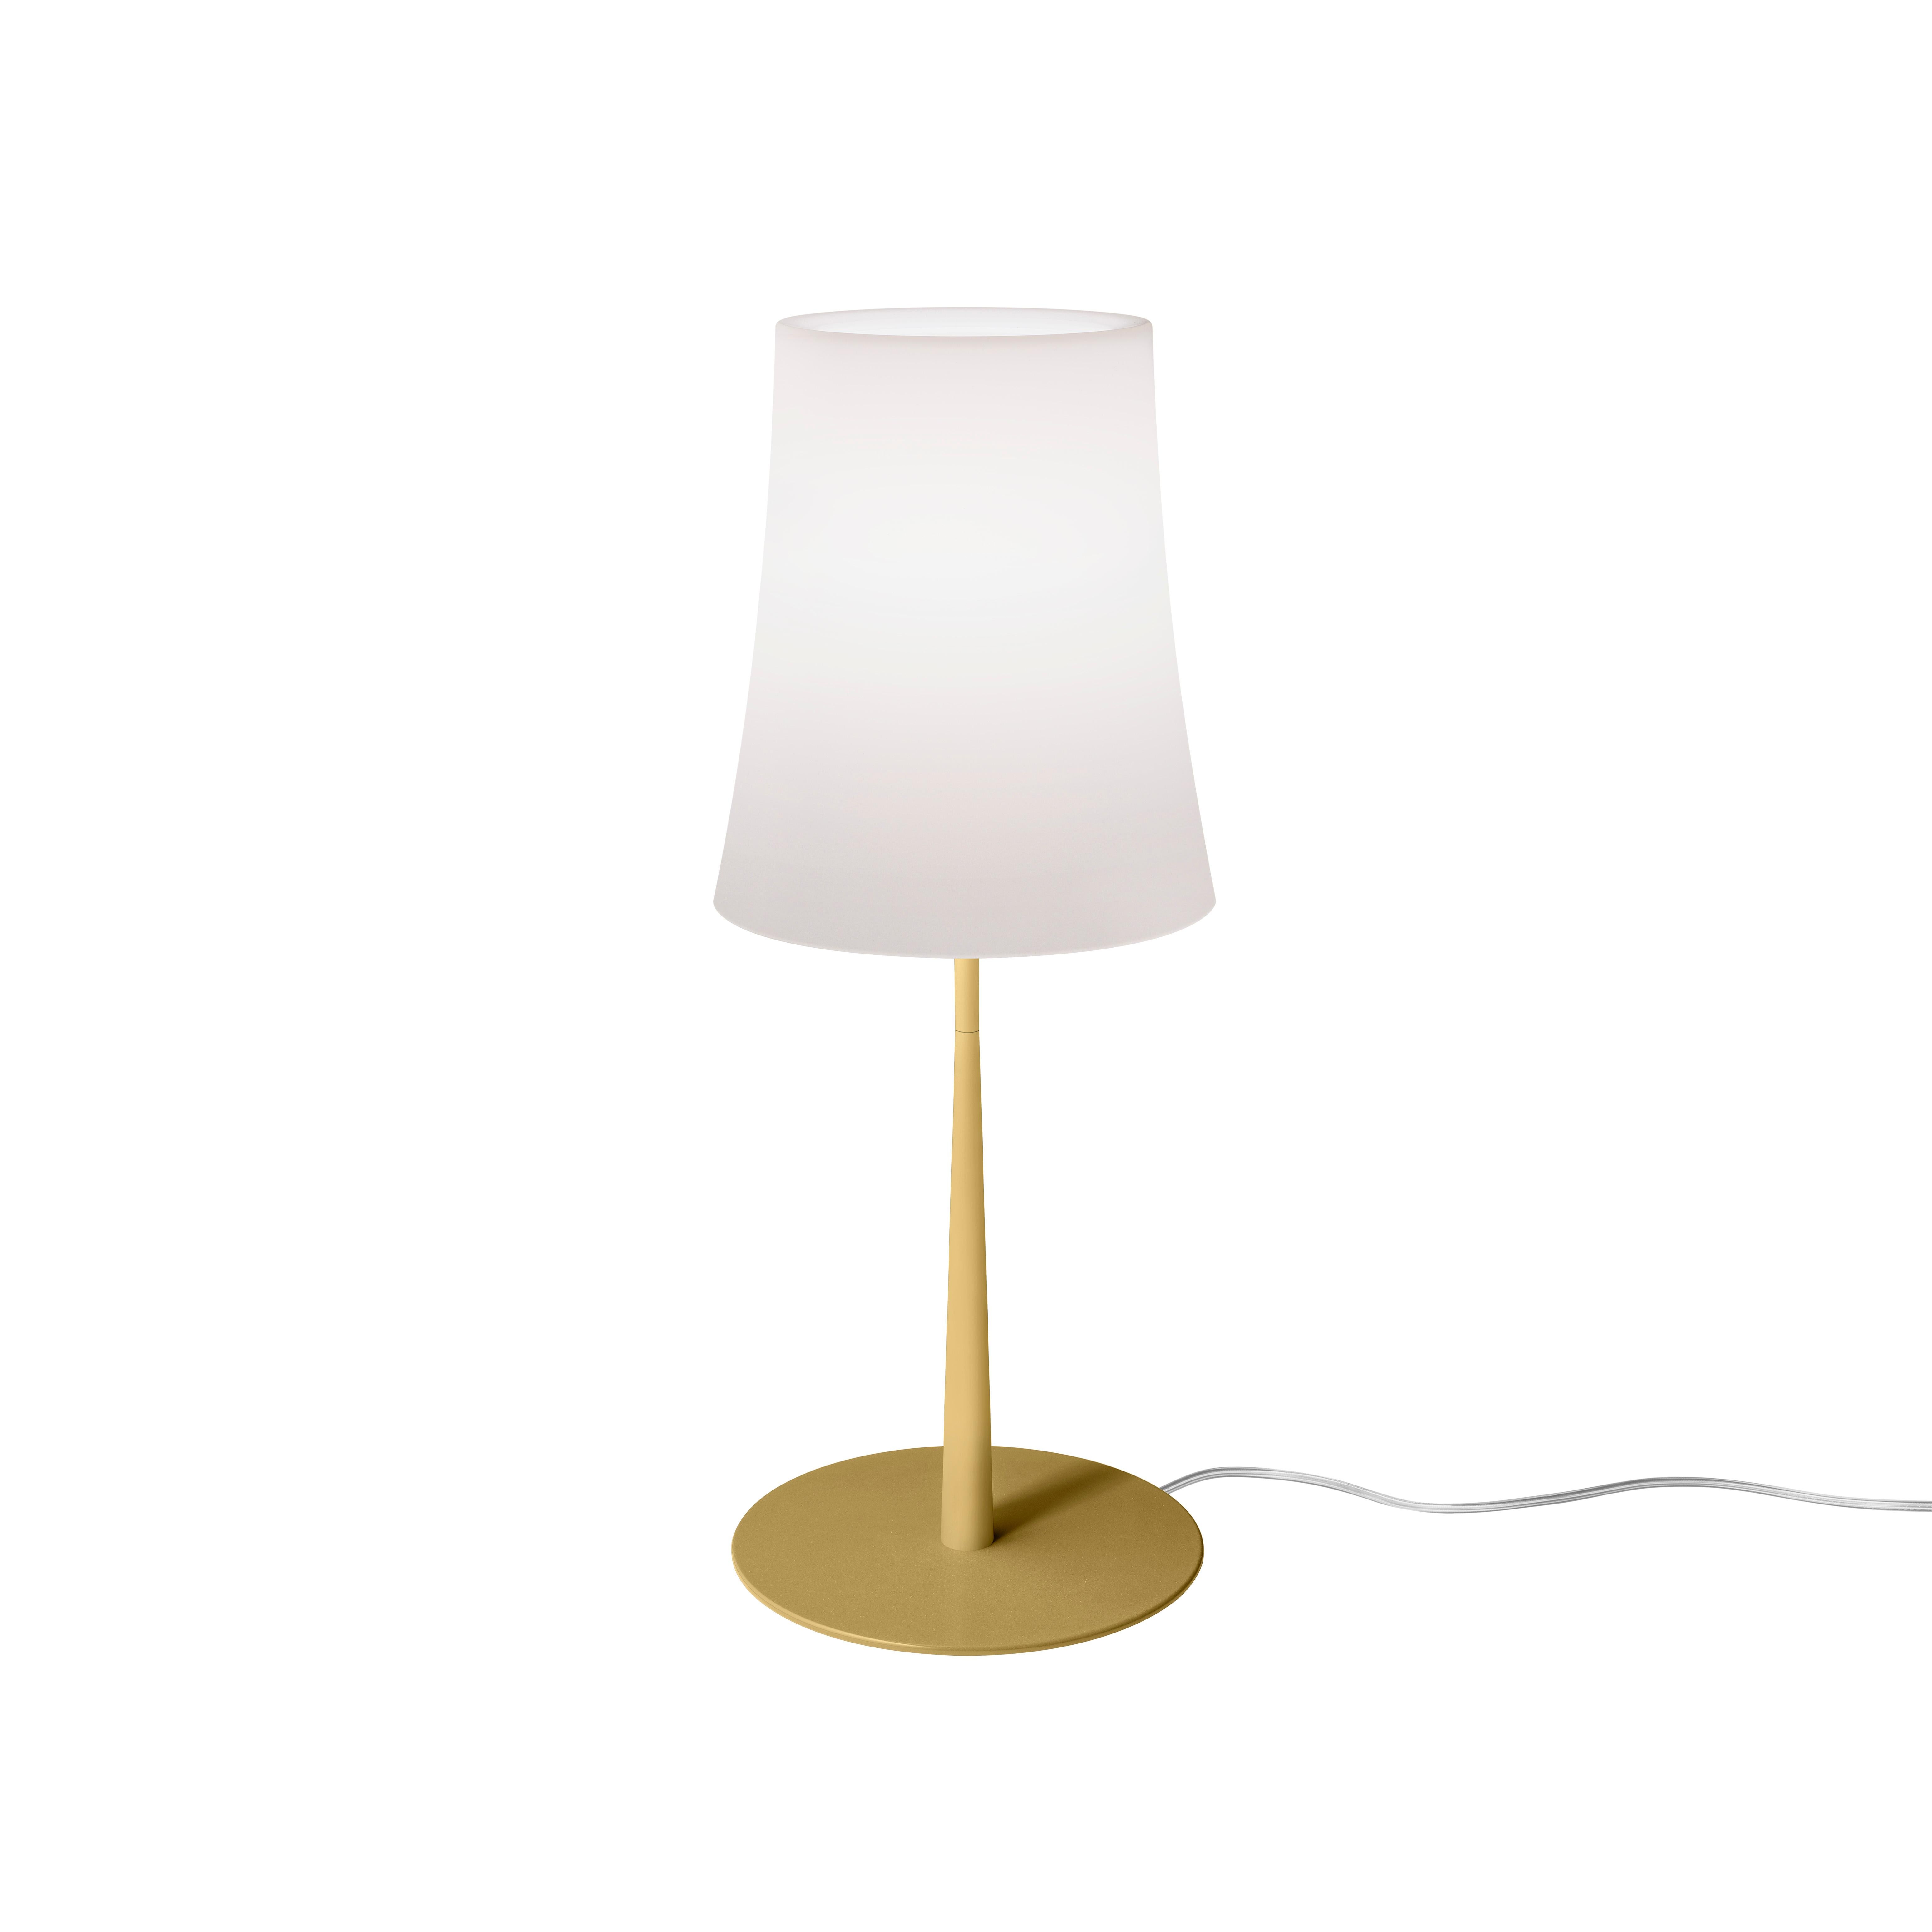 Foscarini Large Dimmable Birdie Easy Table Lamp Ludovica + Roberto Paloma In New Condition For Sale In Brooklyn, NY